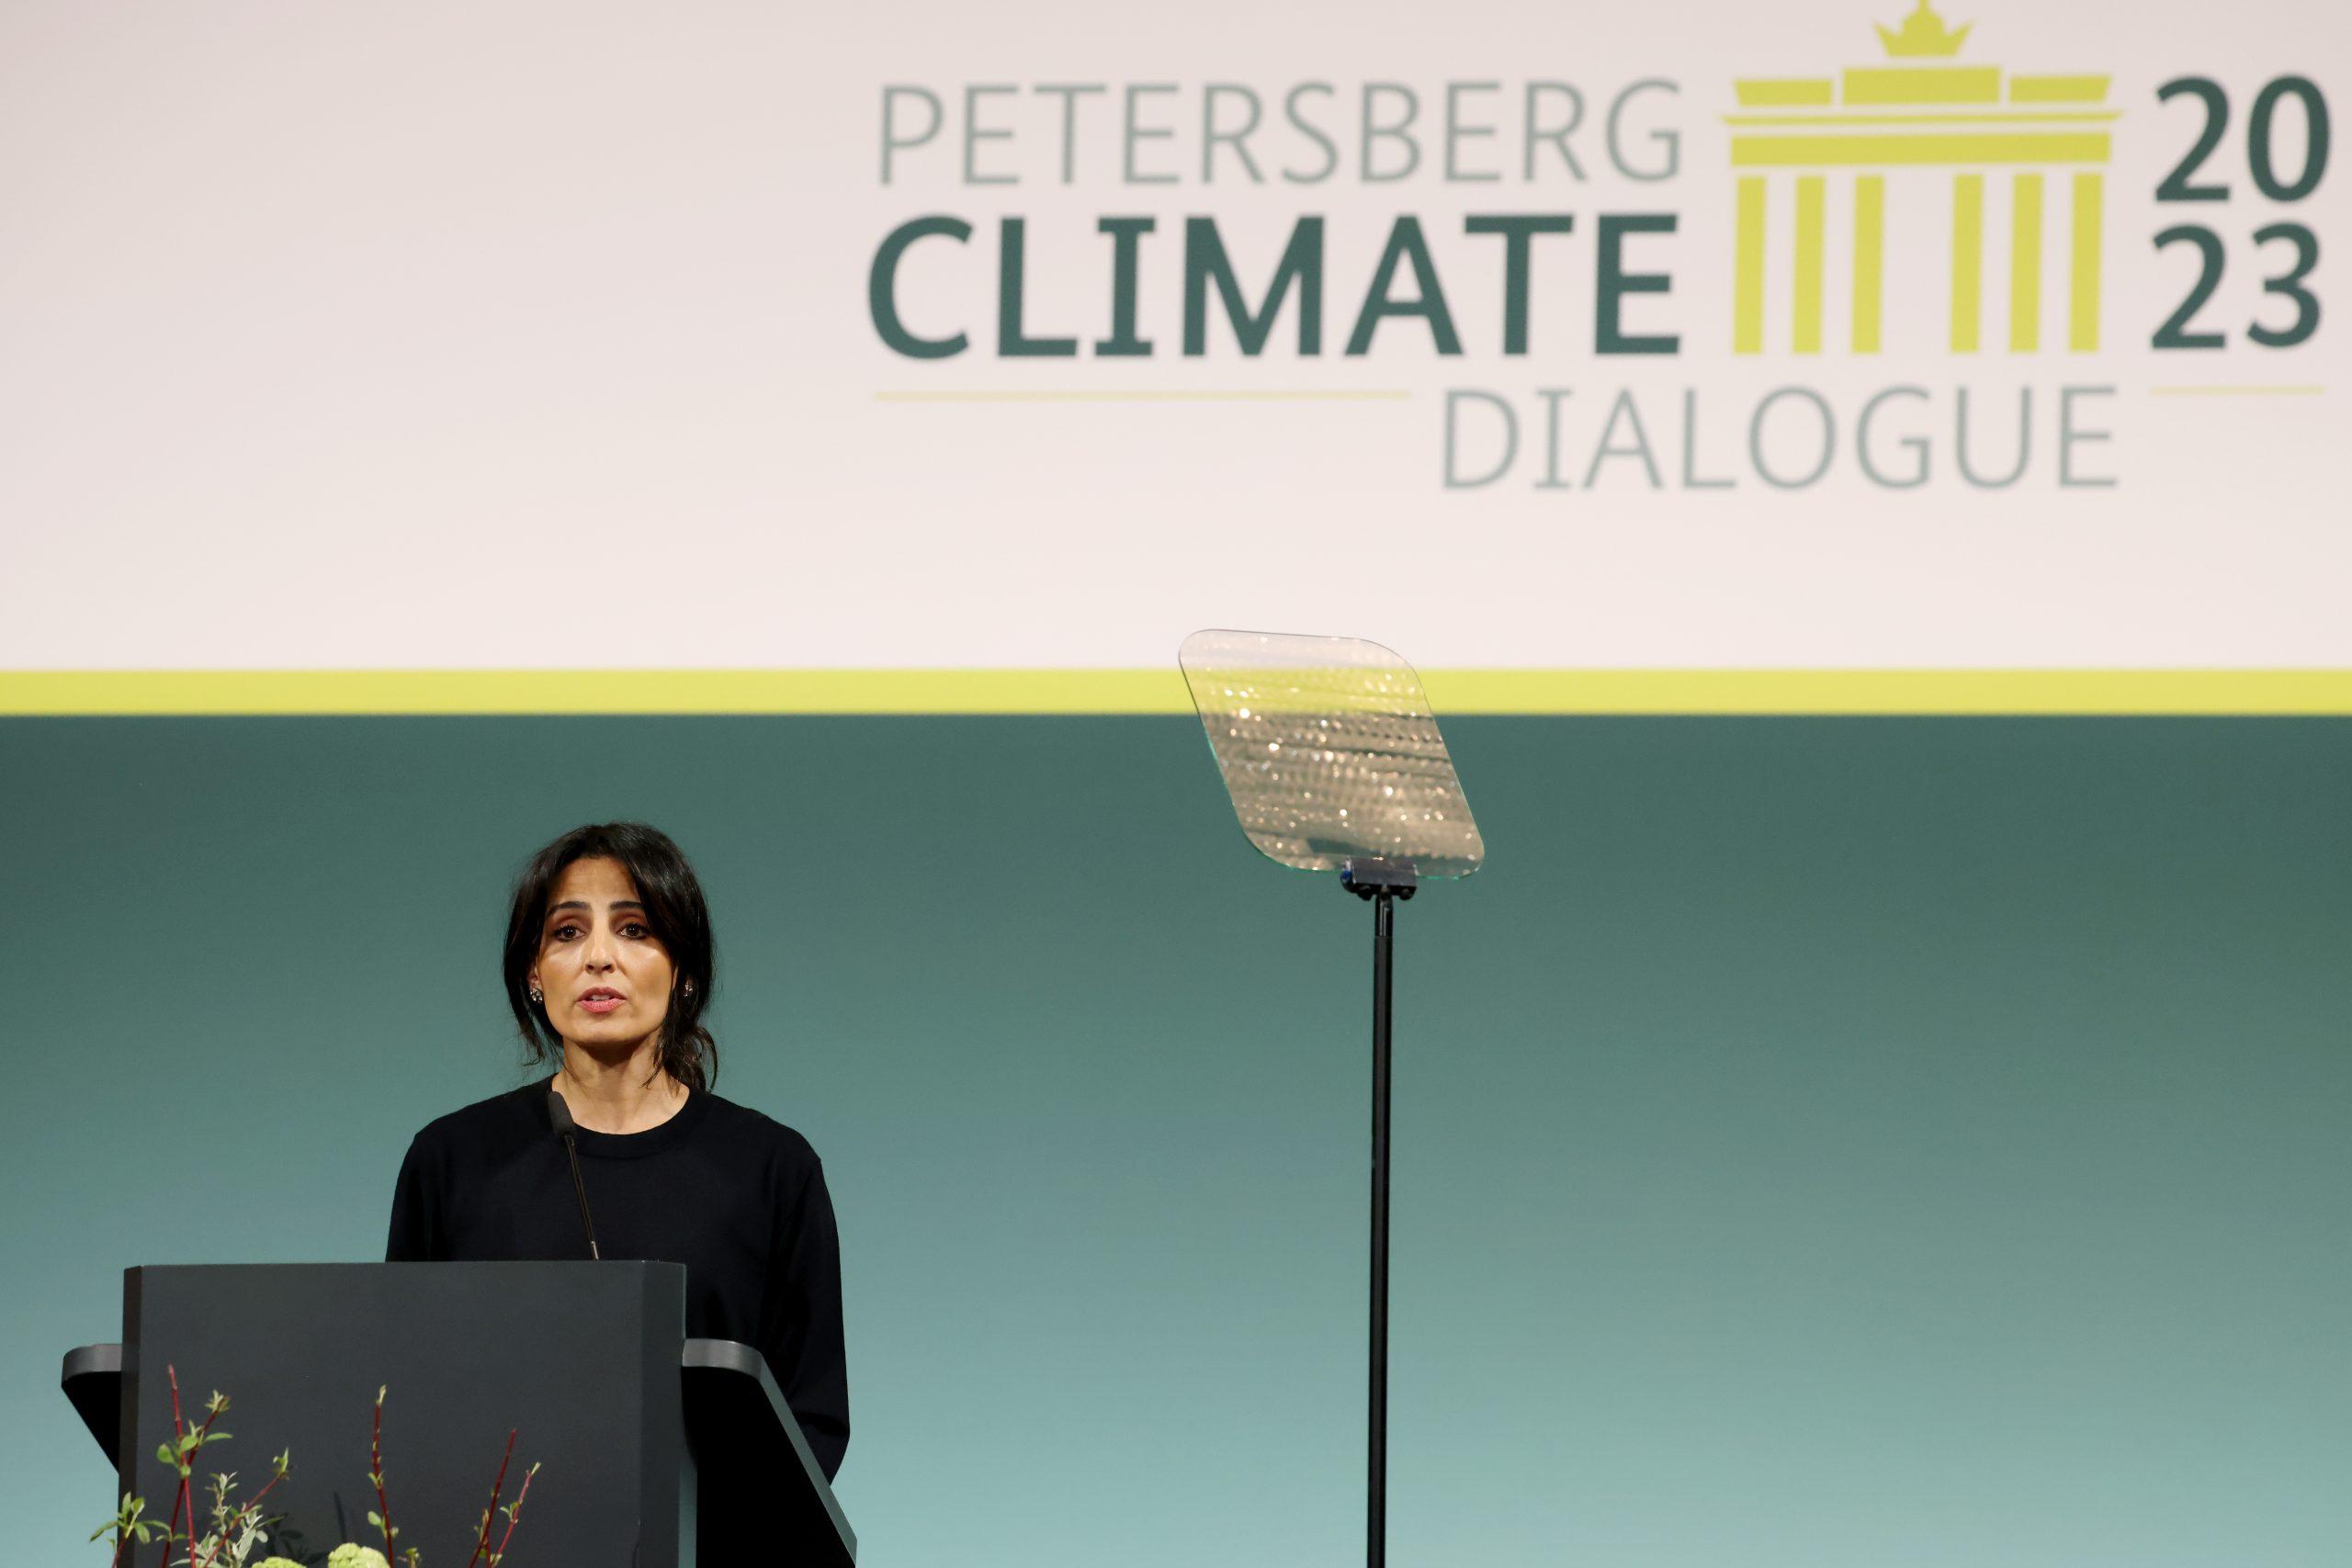 Petersberg Climate Dialogue 2023: Highlights the Need for Urgent Climate Action_40.1